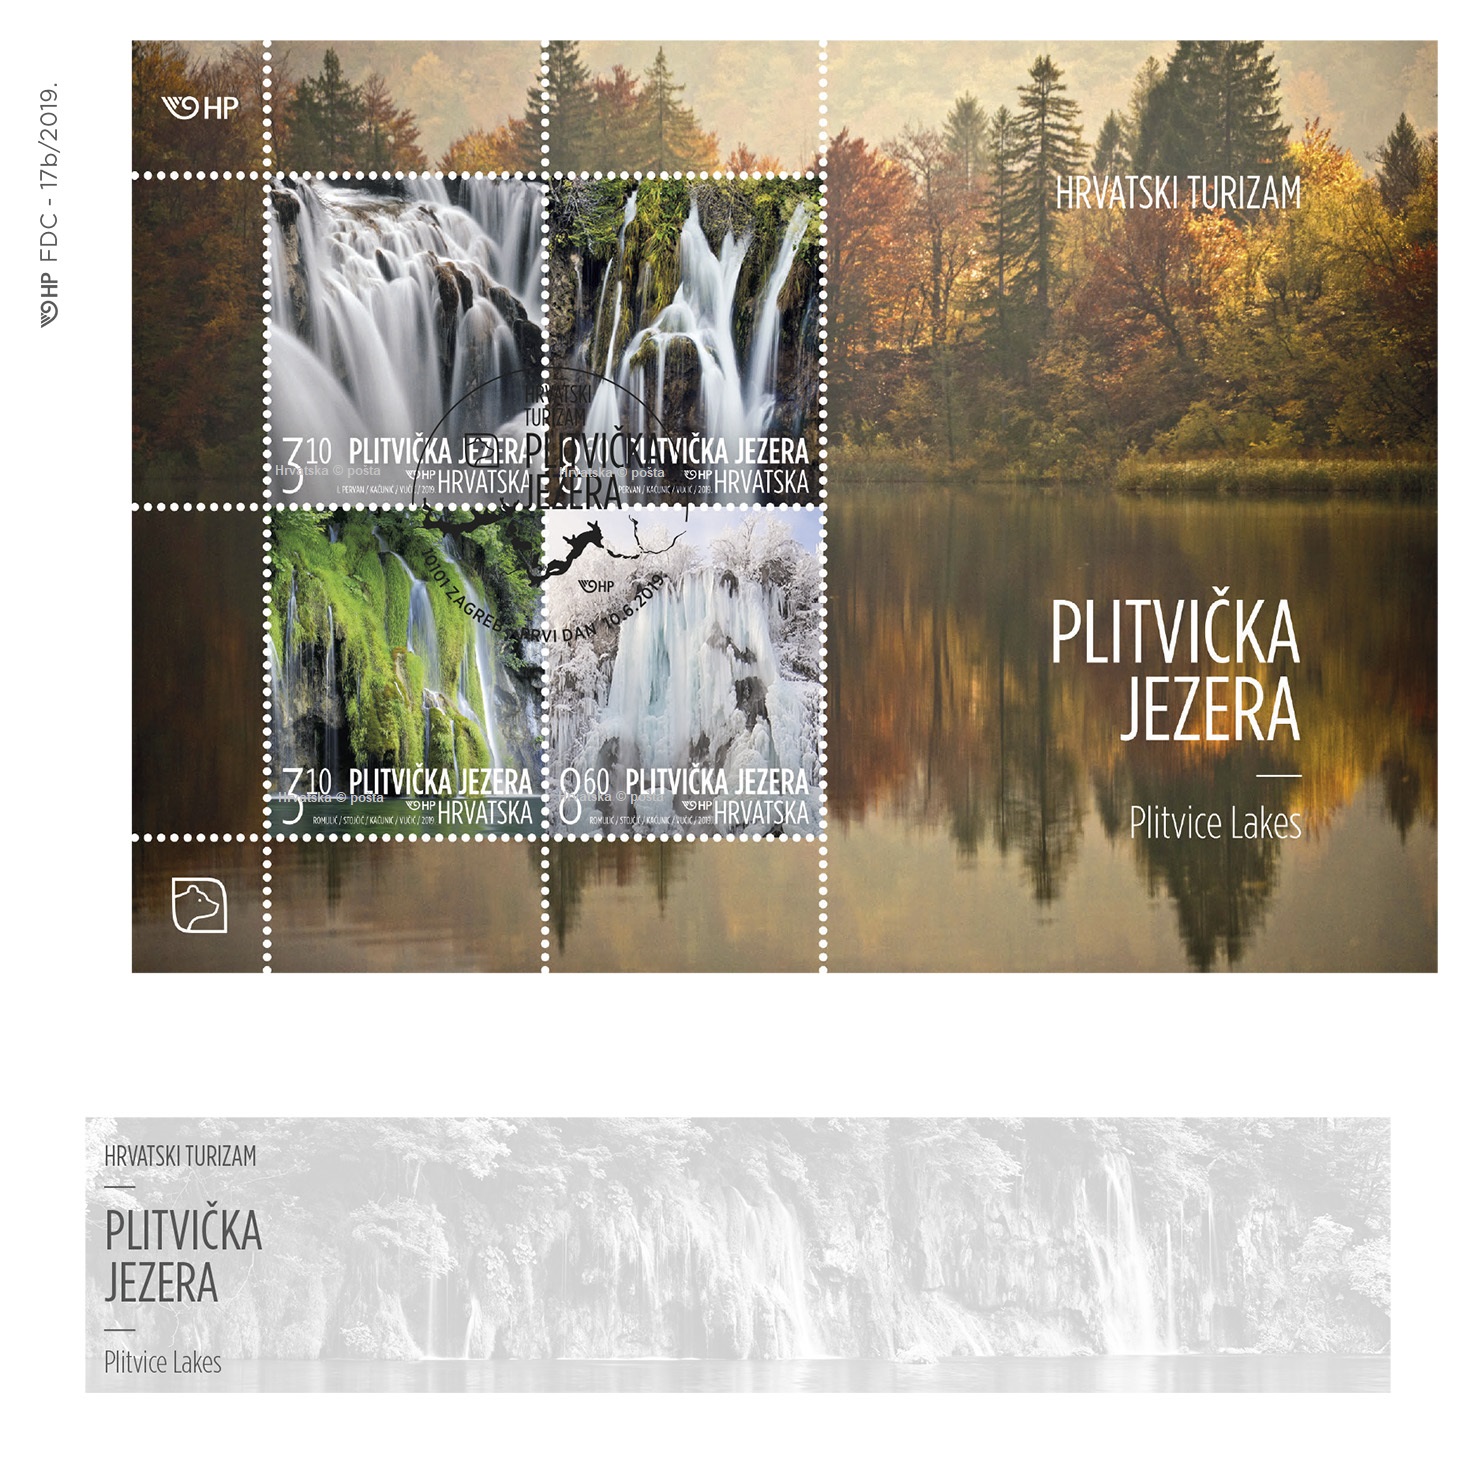 Croatian postage stamp wins world award in Italy 